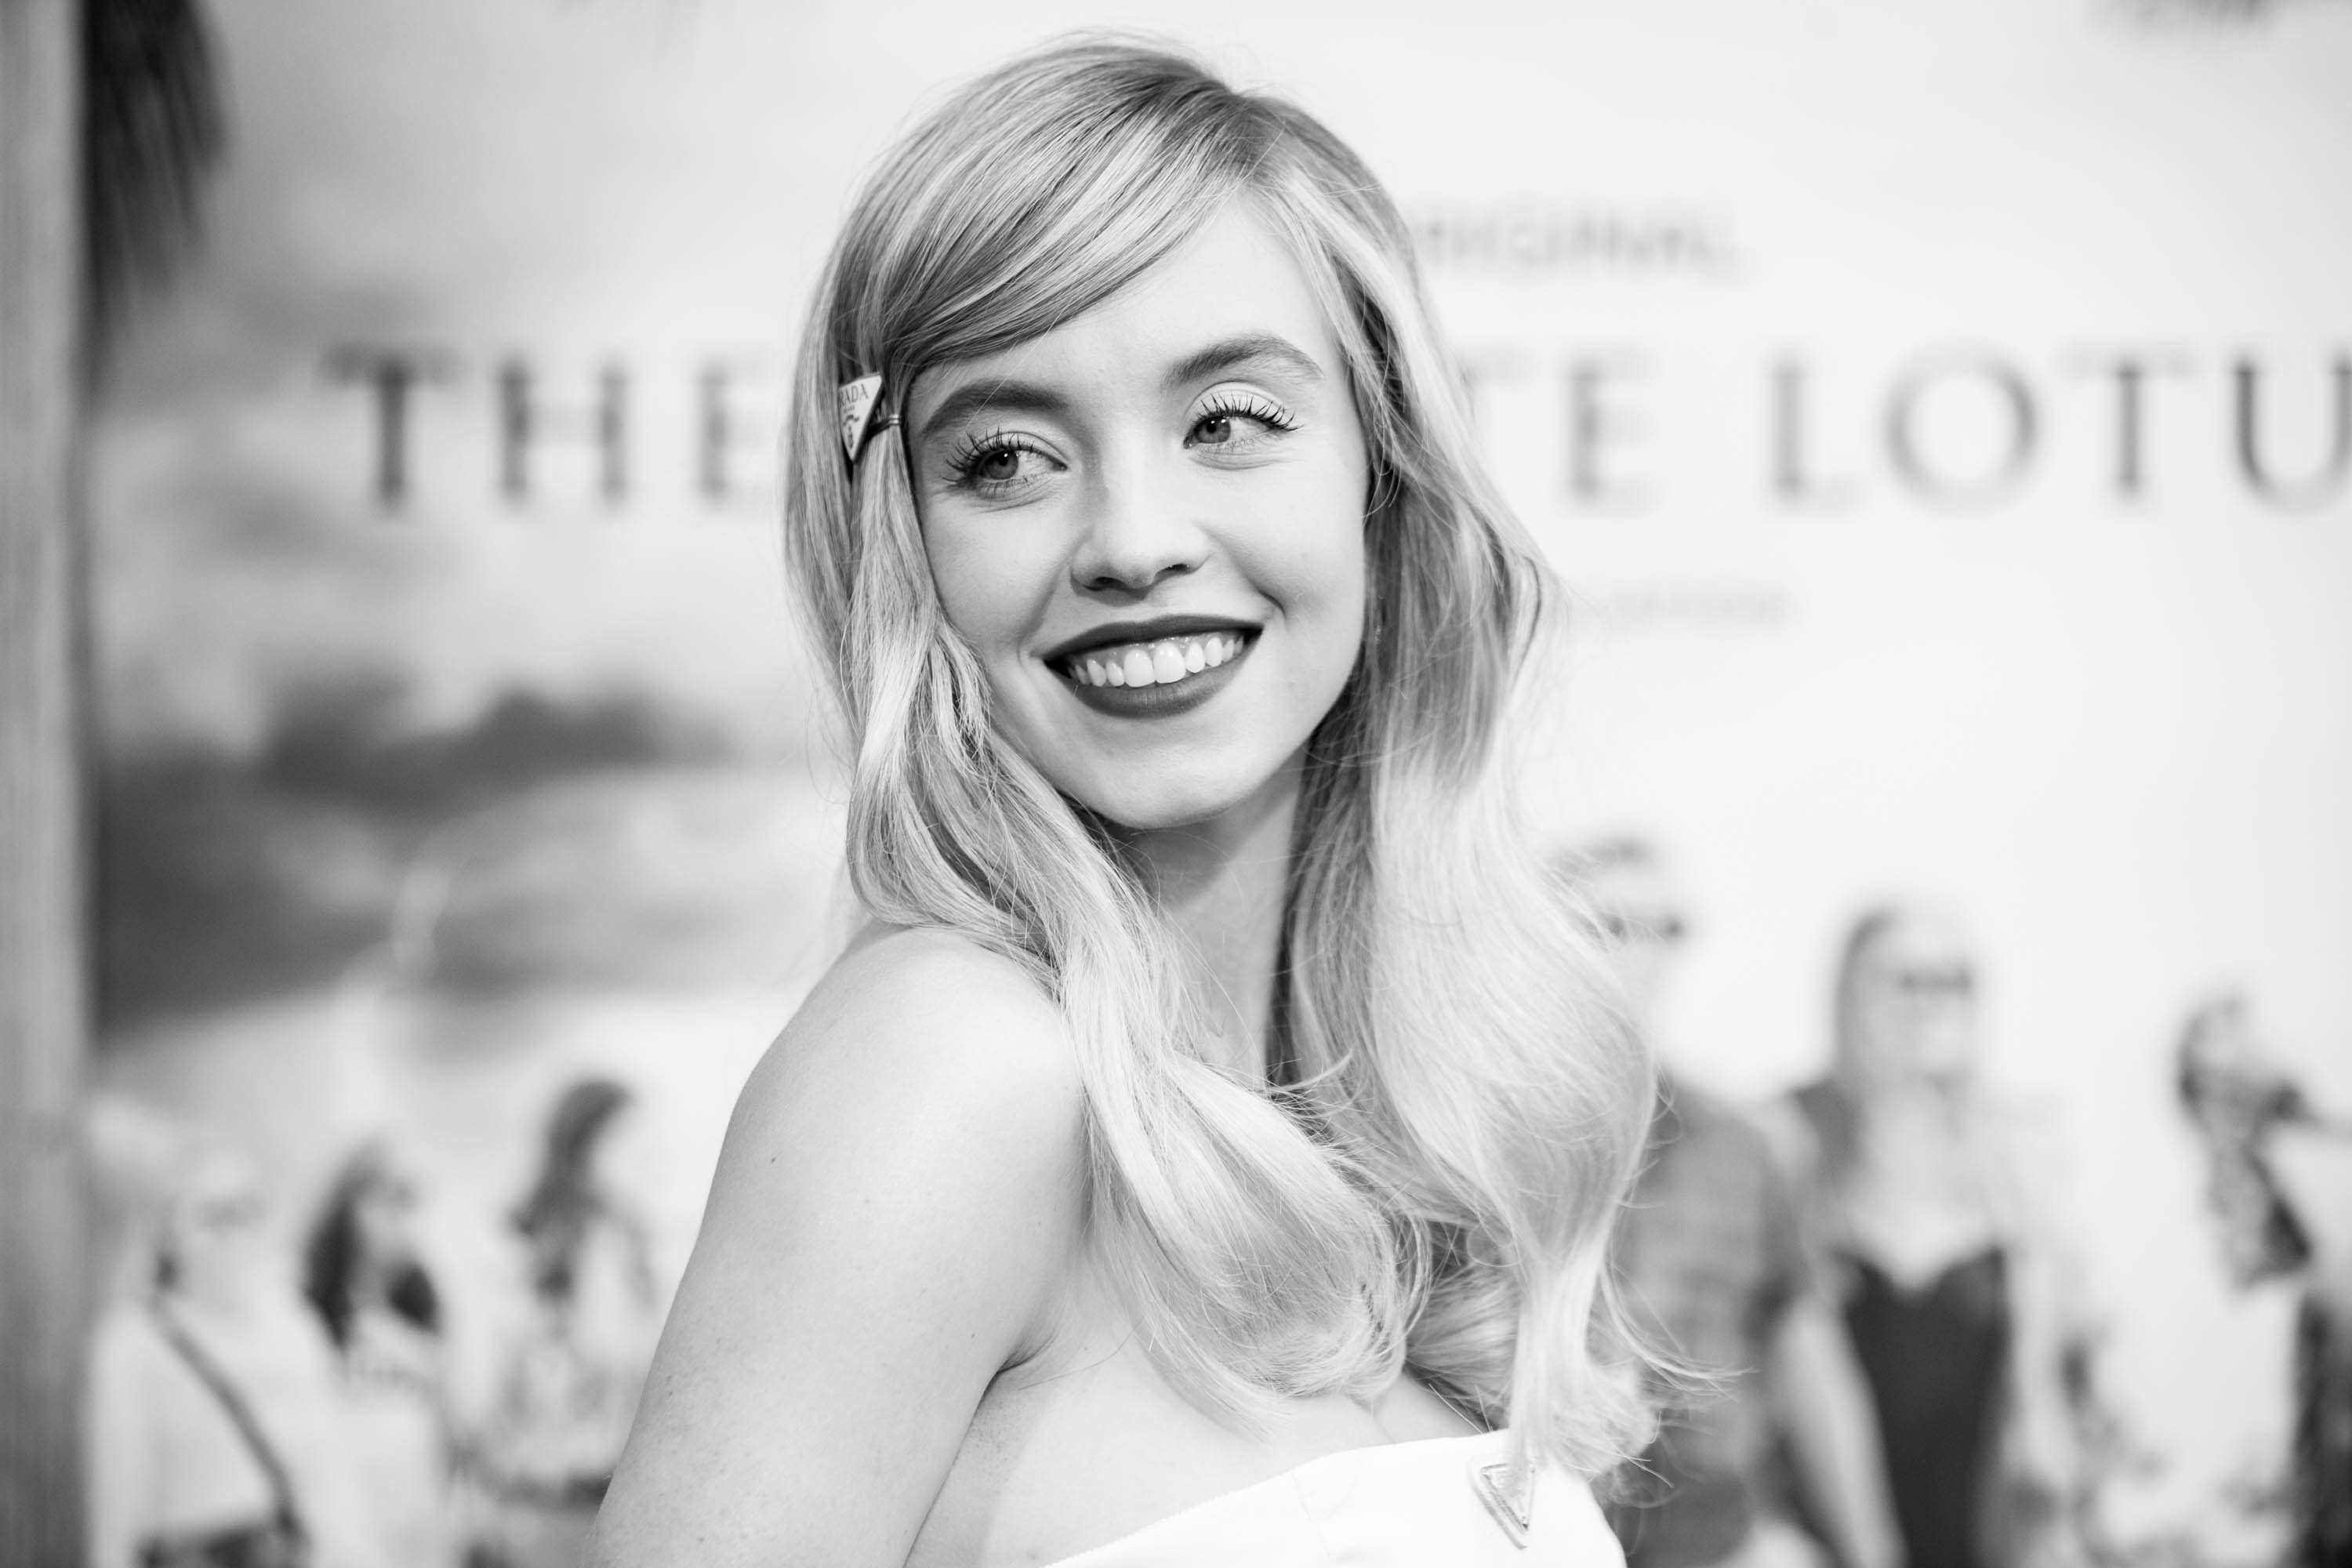 The White Lotus cast member Sydney Sweeney wears a white dress to the premiere of the show